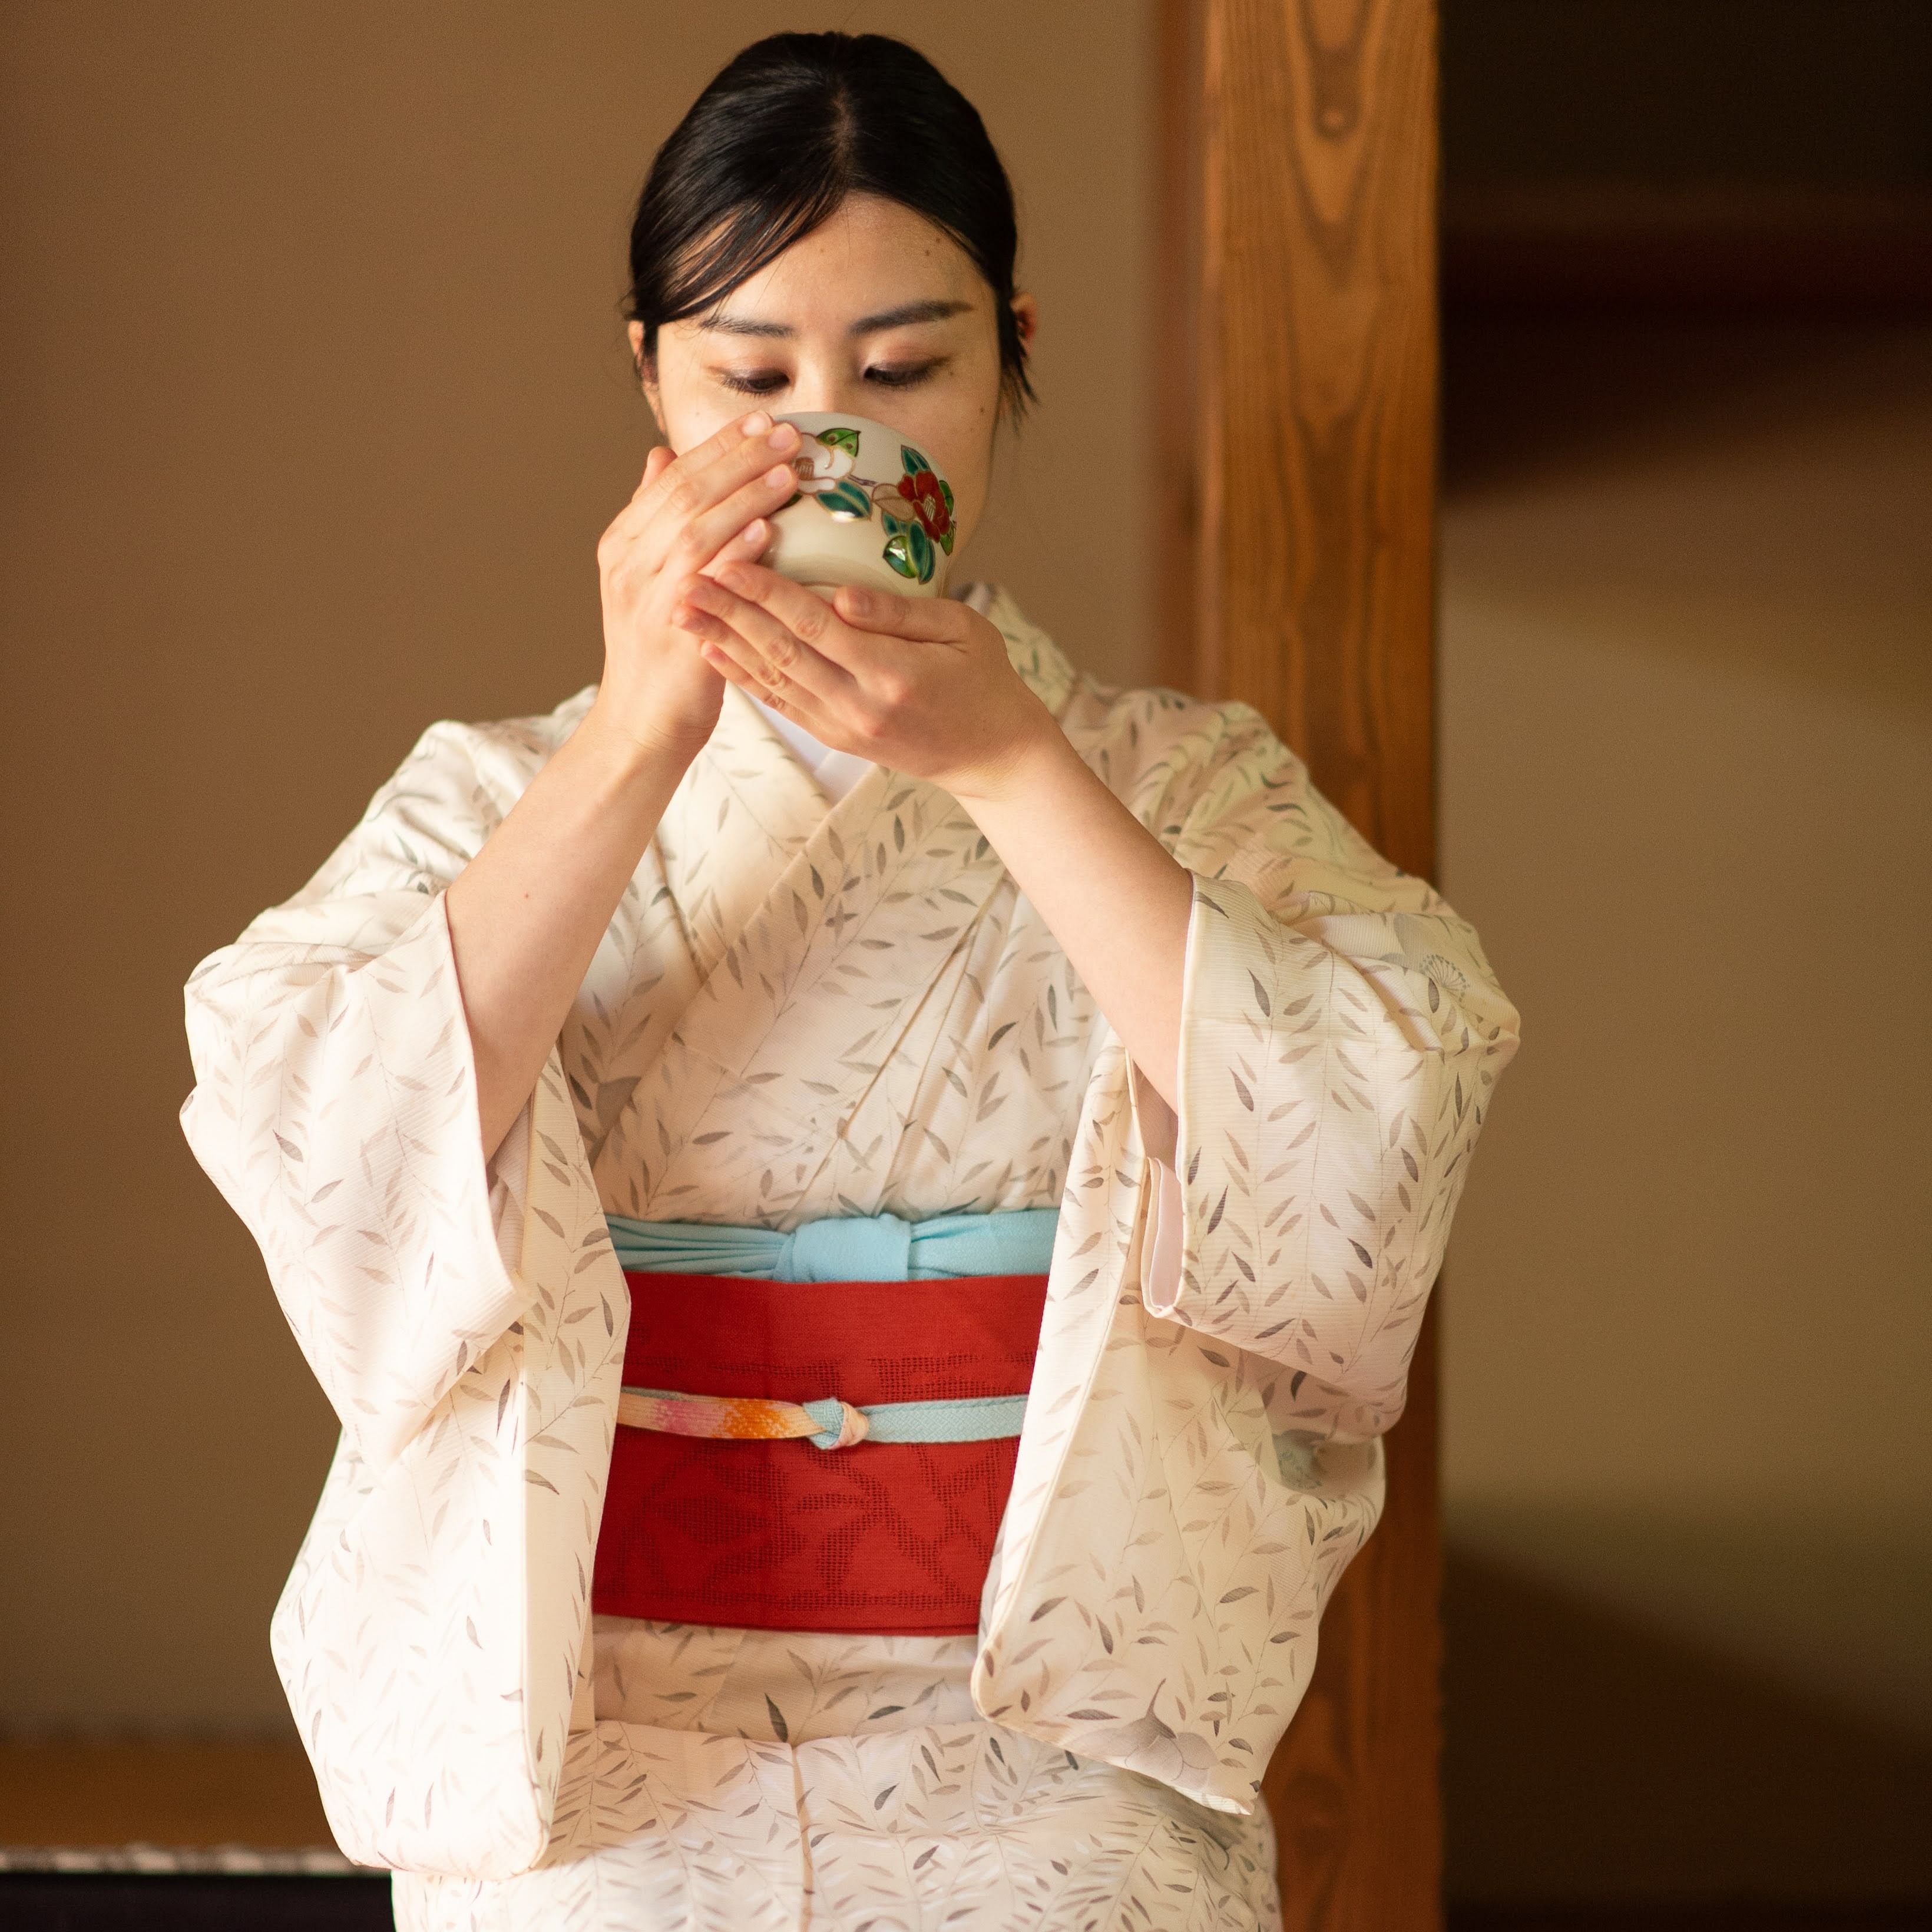 Flower Teahouse - Private Tea Ceremony Experience